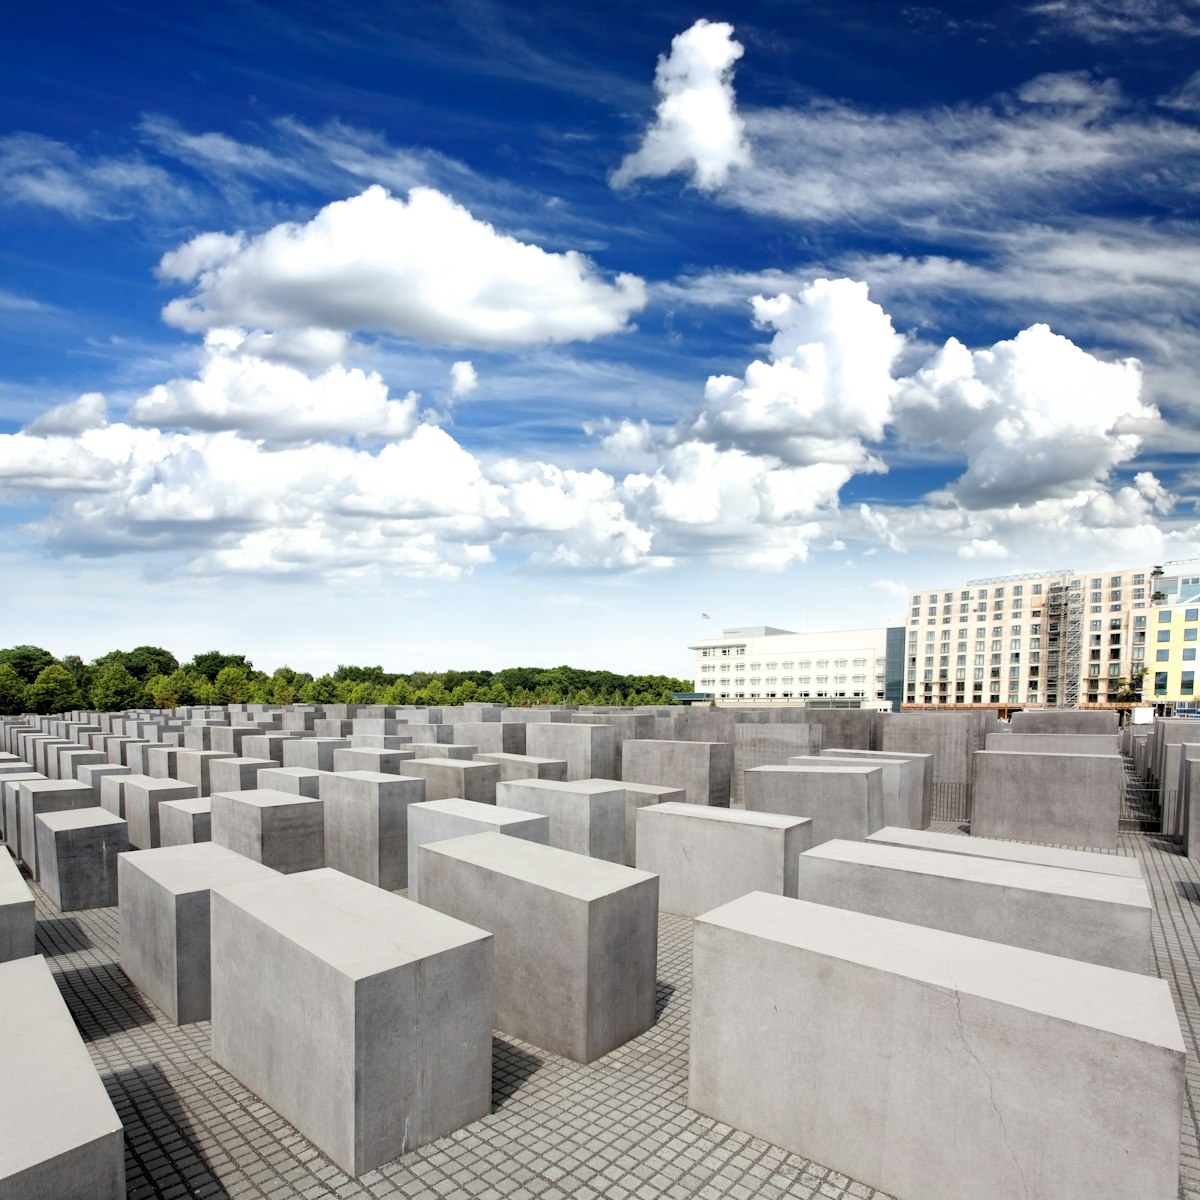 The jewish memorial in central berlin, germany; Shutterstock ID 59438677; Your name (First / Last): Josh Vogel; Project no. or GL code: 56530; Network activity no. or Cost Centre: Online-Design; Product or Project: 65050/7529/Josh Vogel/LP.com Destination Galleries